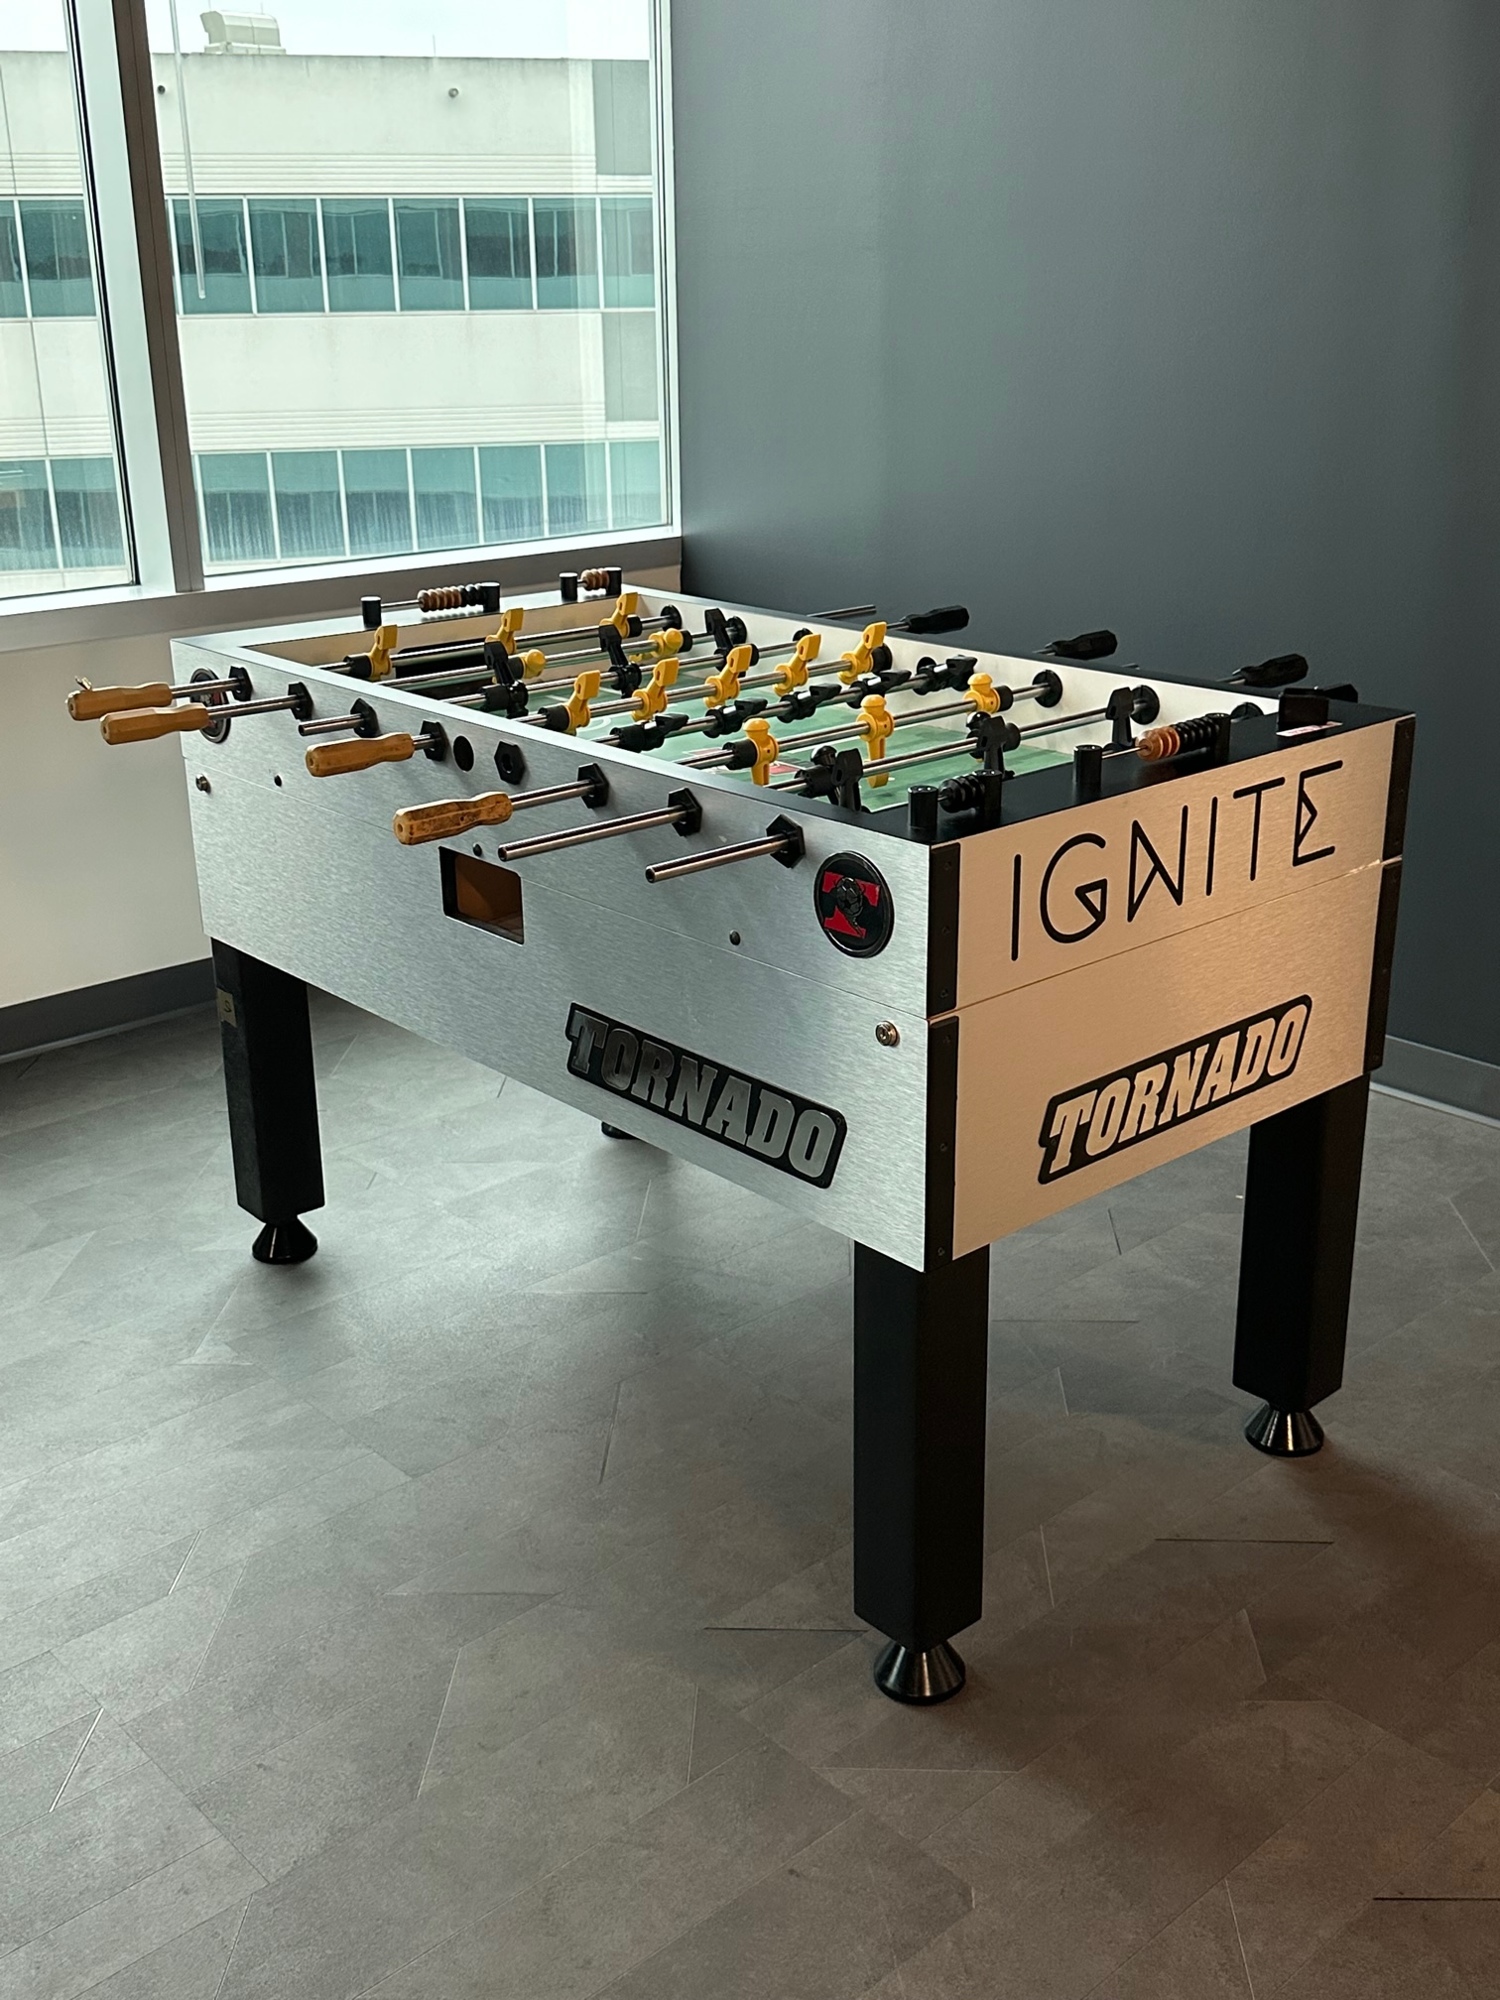 A foosball table is available for play.